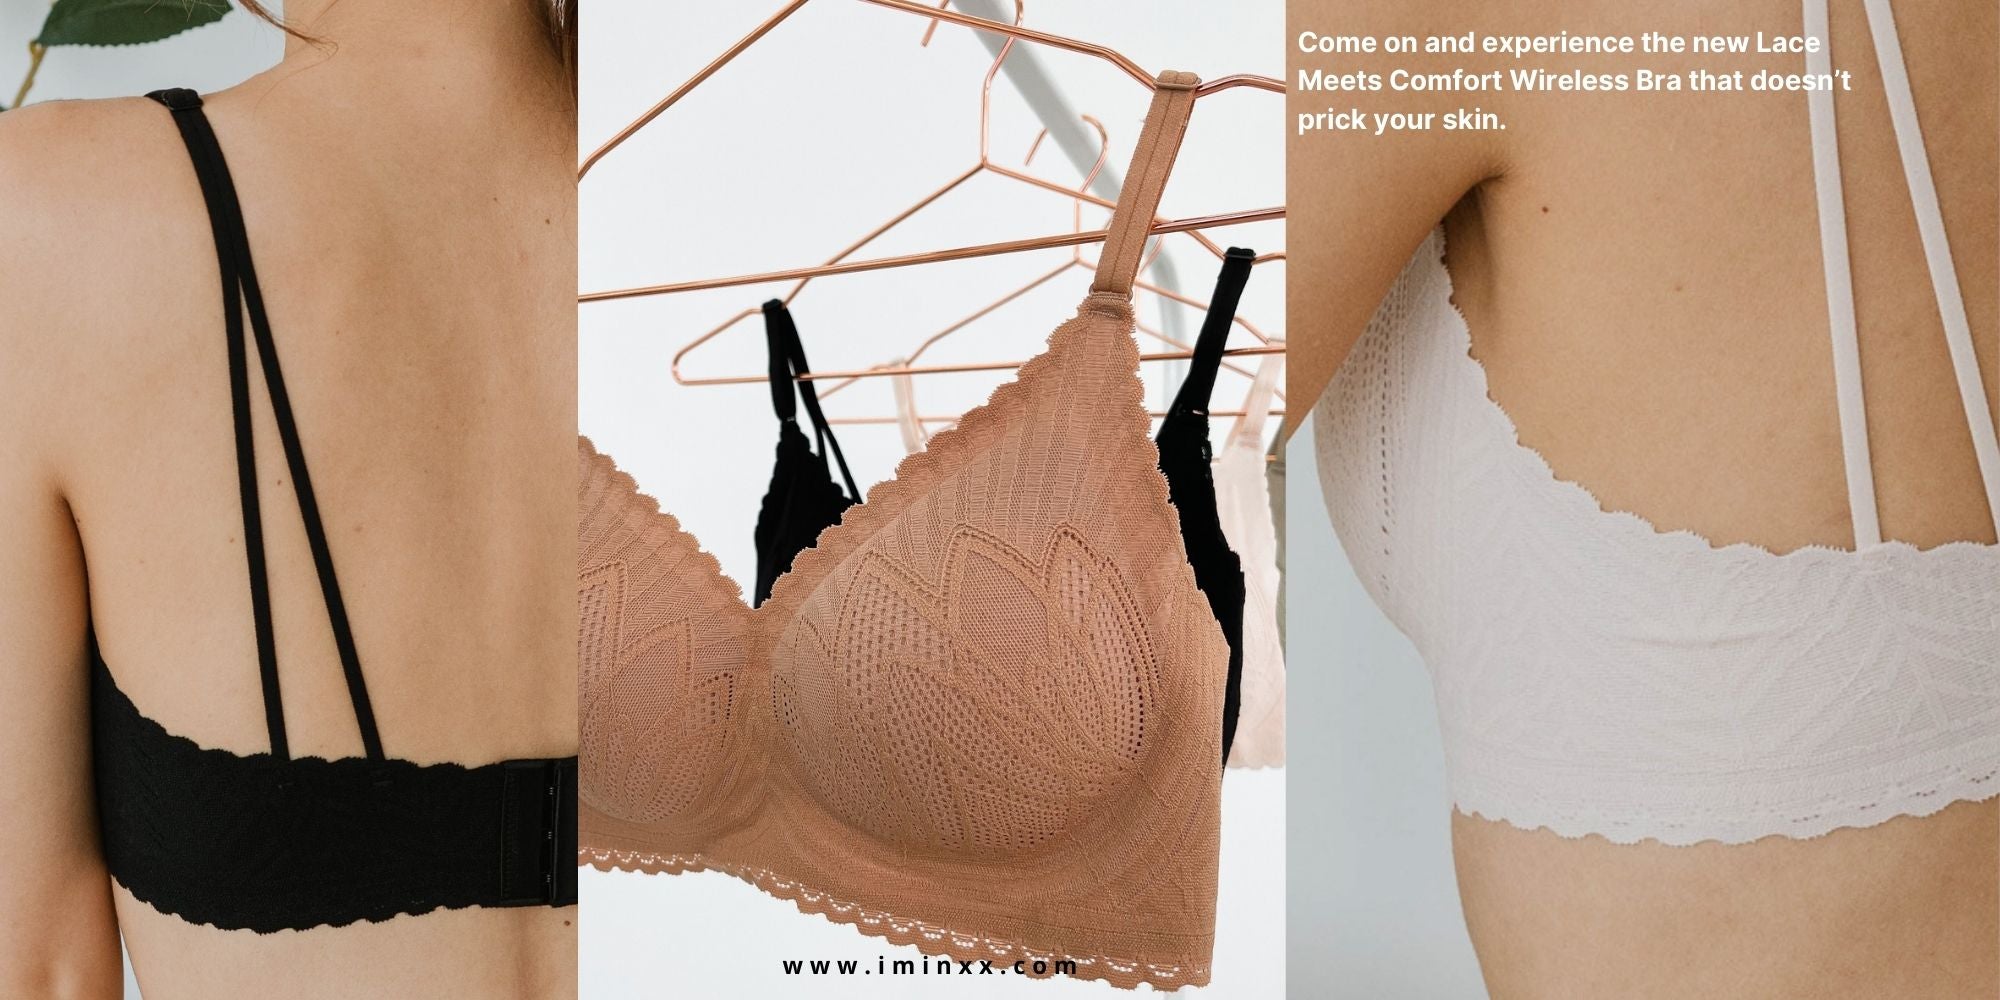 Lace Meets Comfort Seamless Wireless Bra Tagged 34A/75A